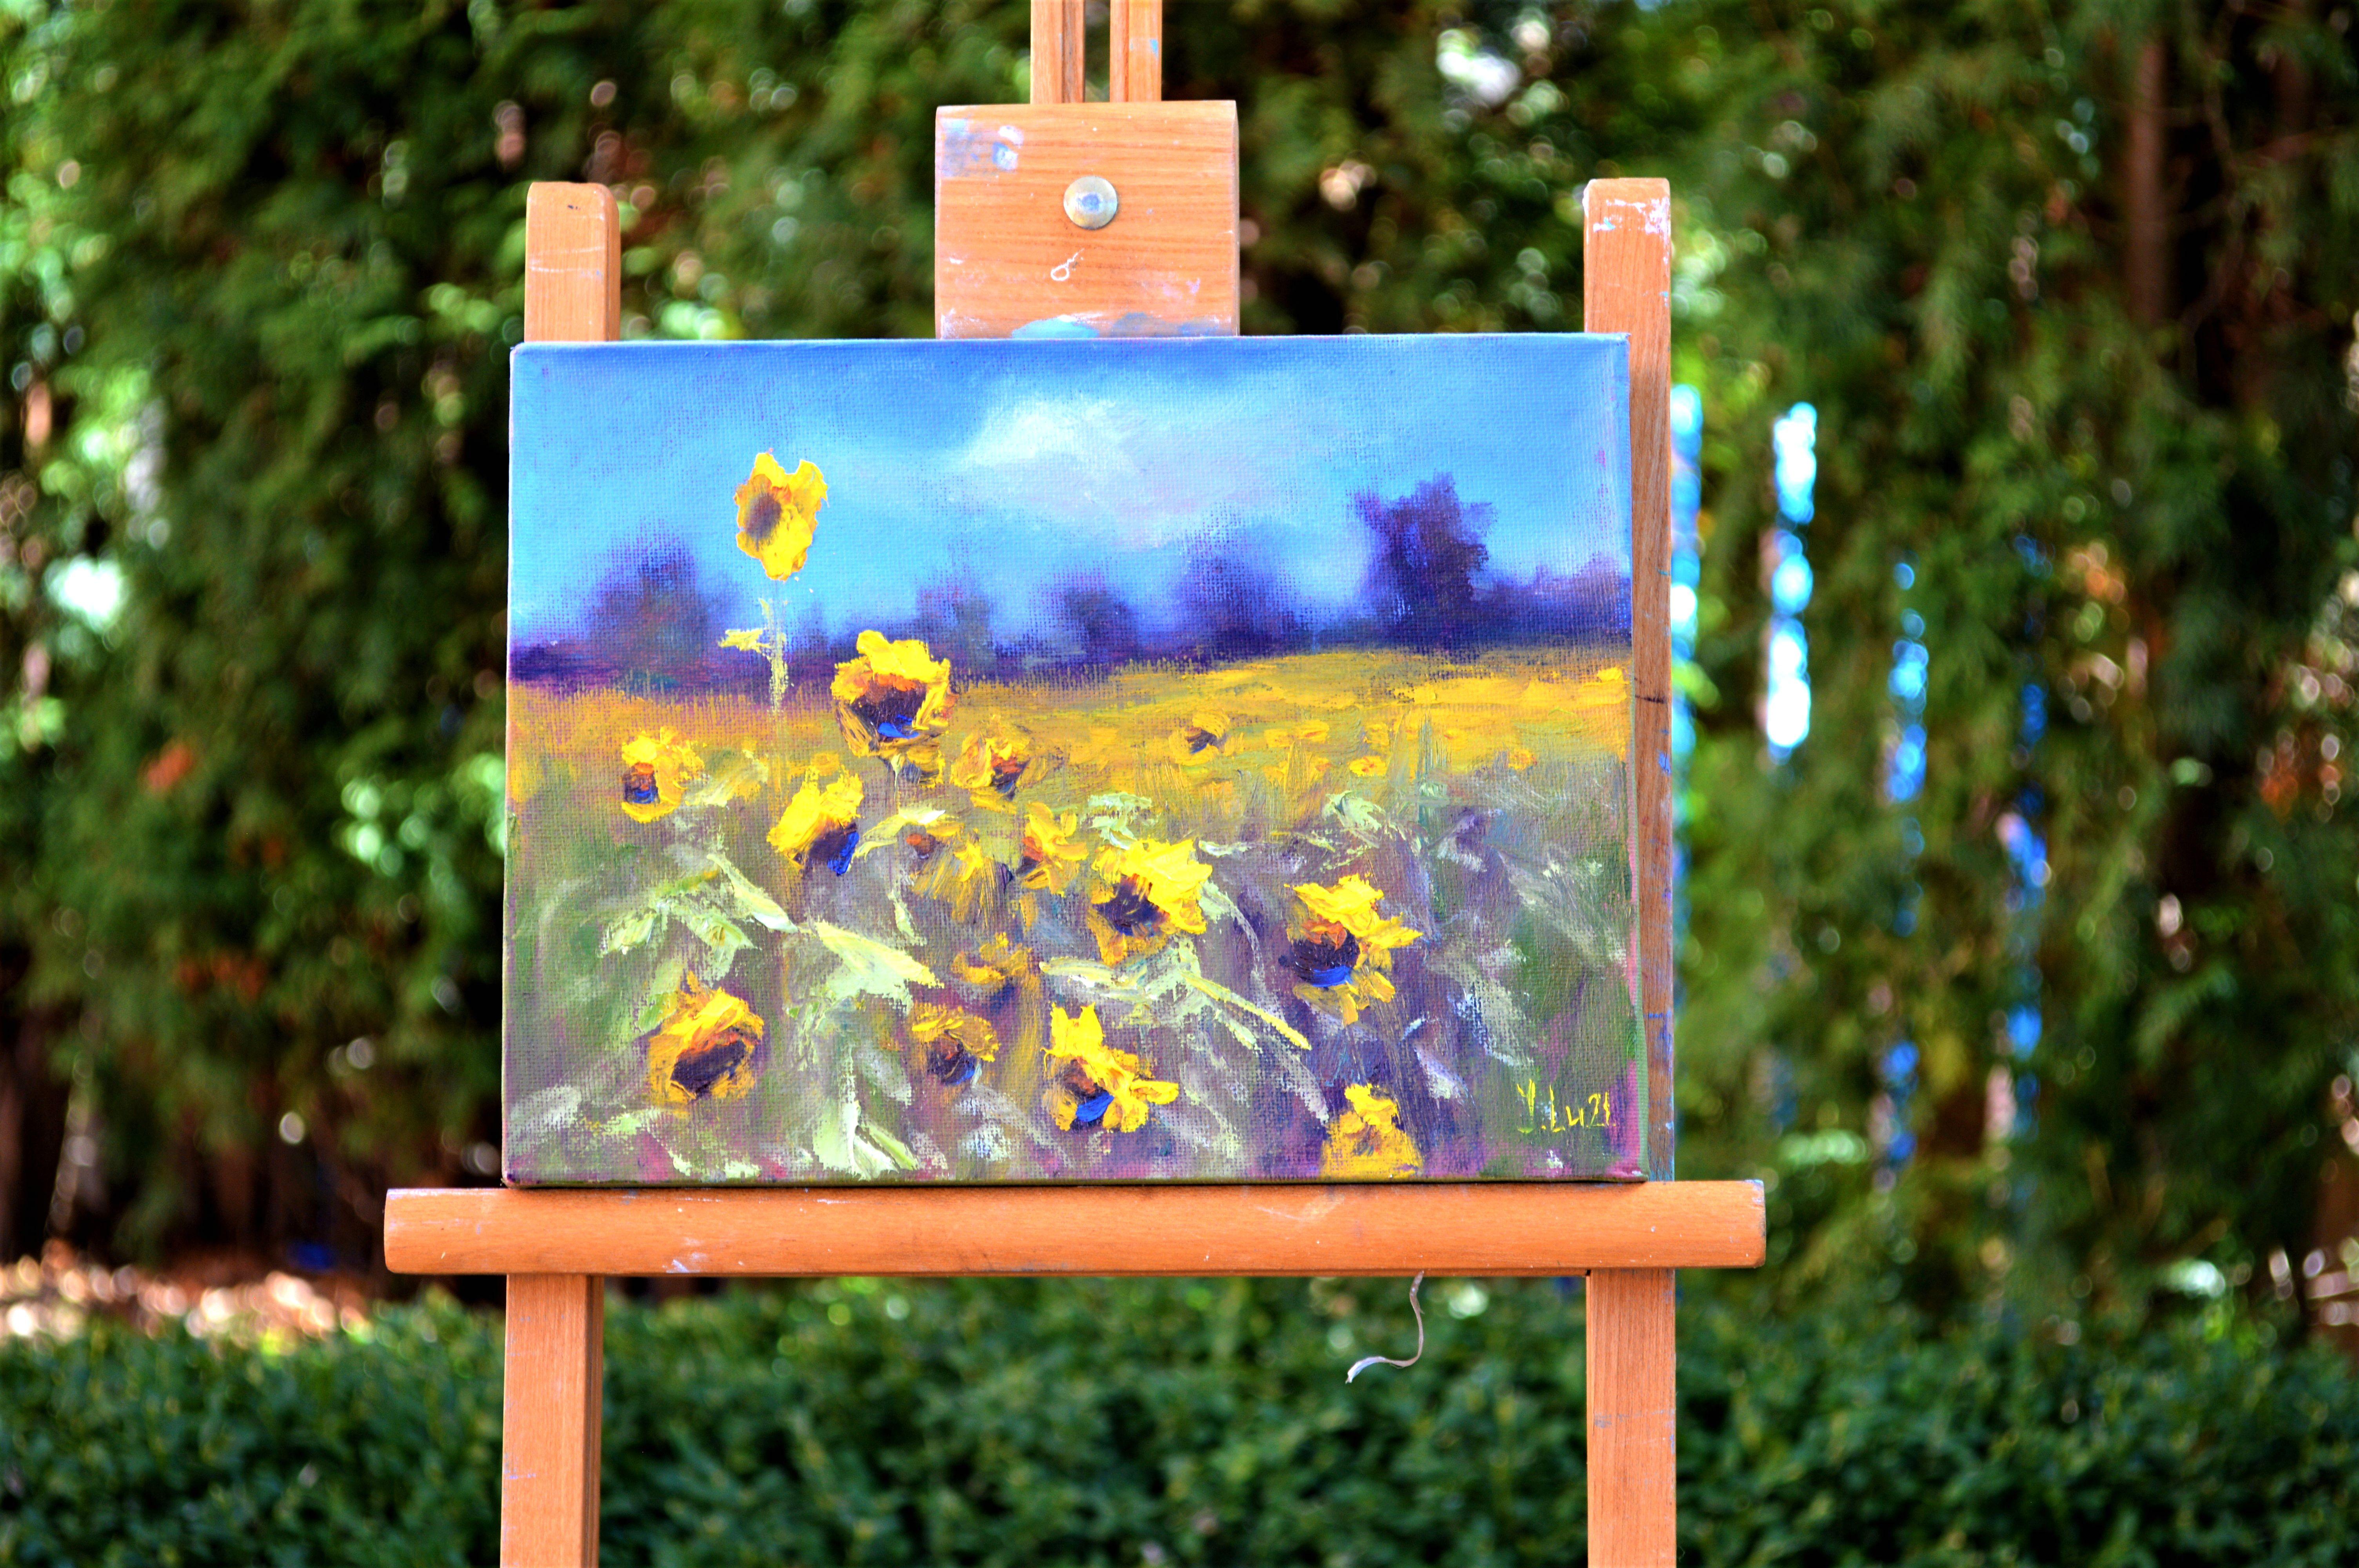 In this painting, I sought to capture the vibrant essence of life, channeling my emotions into each stroke. The bold sunflowers stand as symbols of joy and exuberance, their bright faces dancing against a dynamic sky. This artwork is meant to